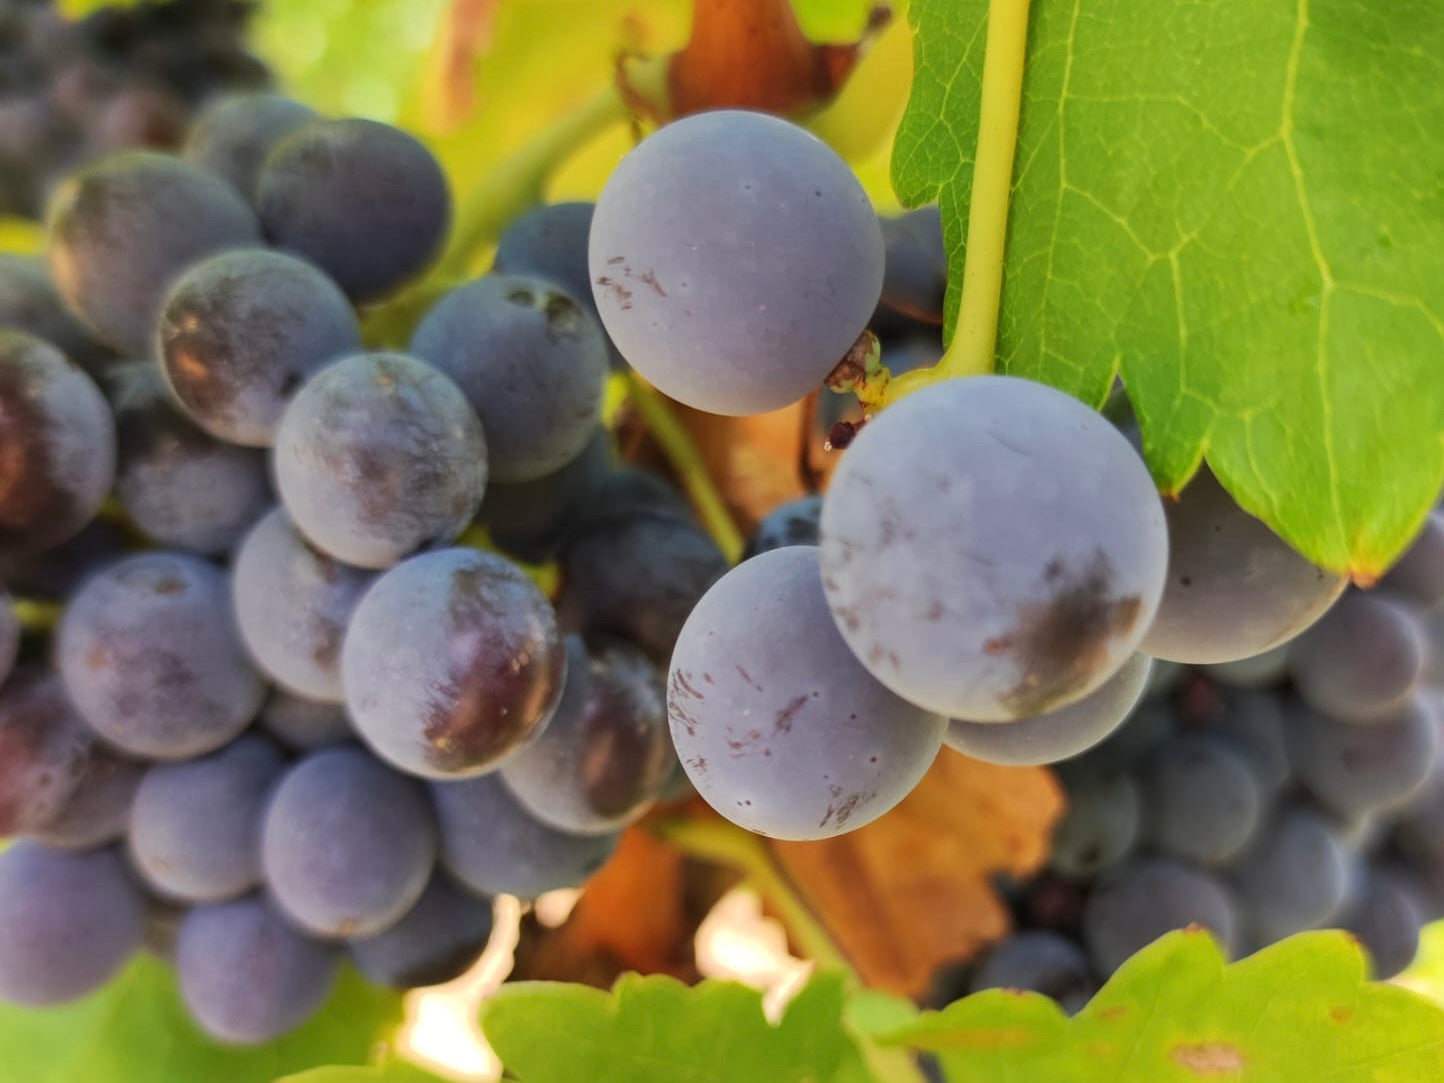 Grenache: blood, fire and juicy sweetness